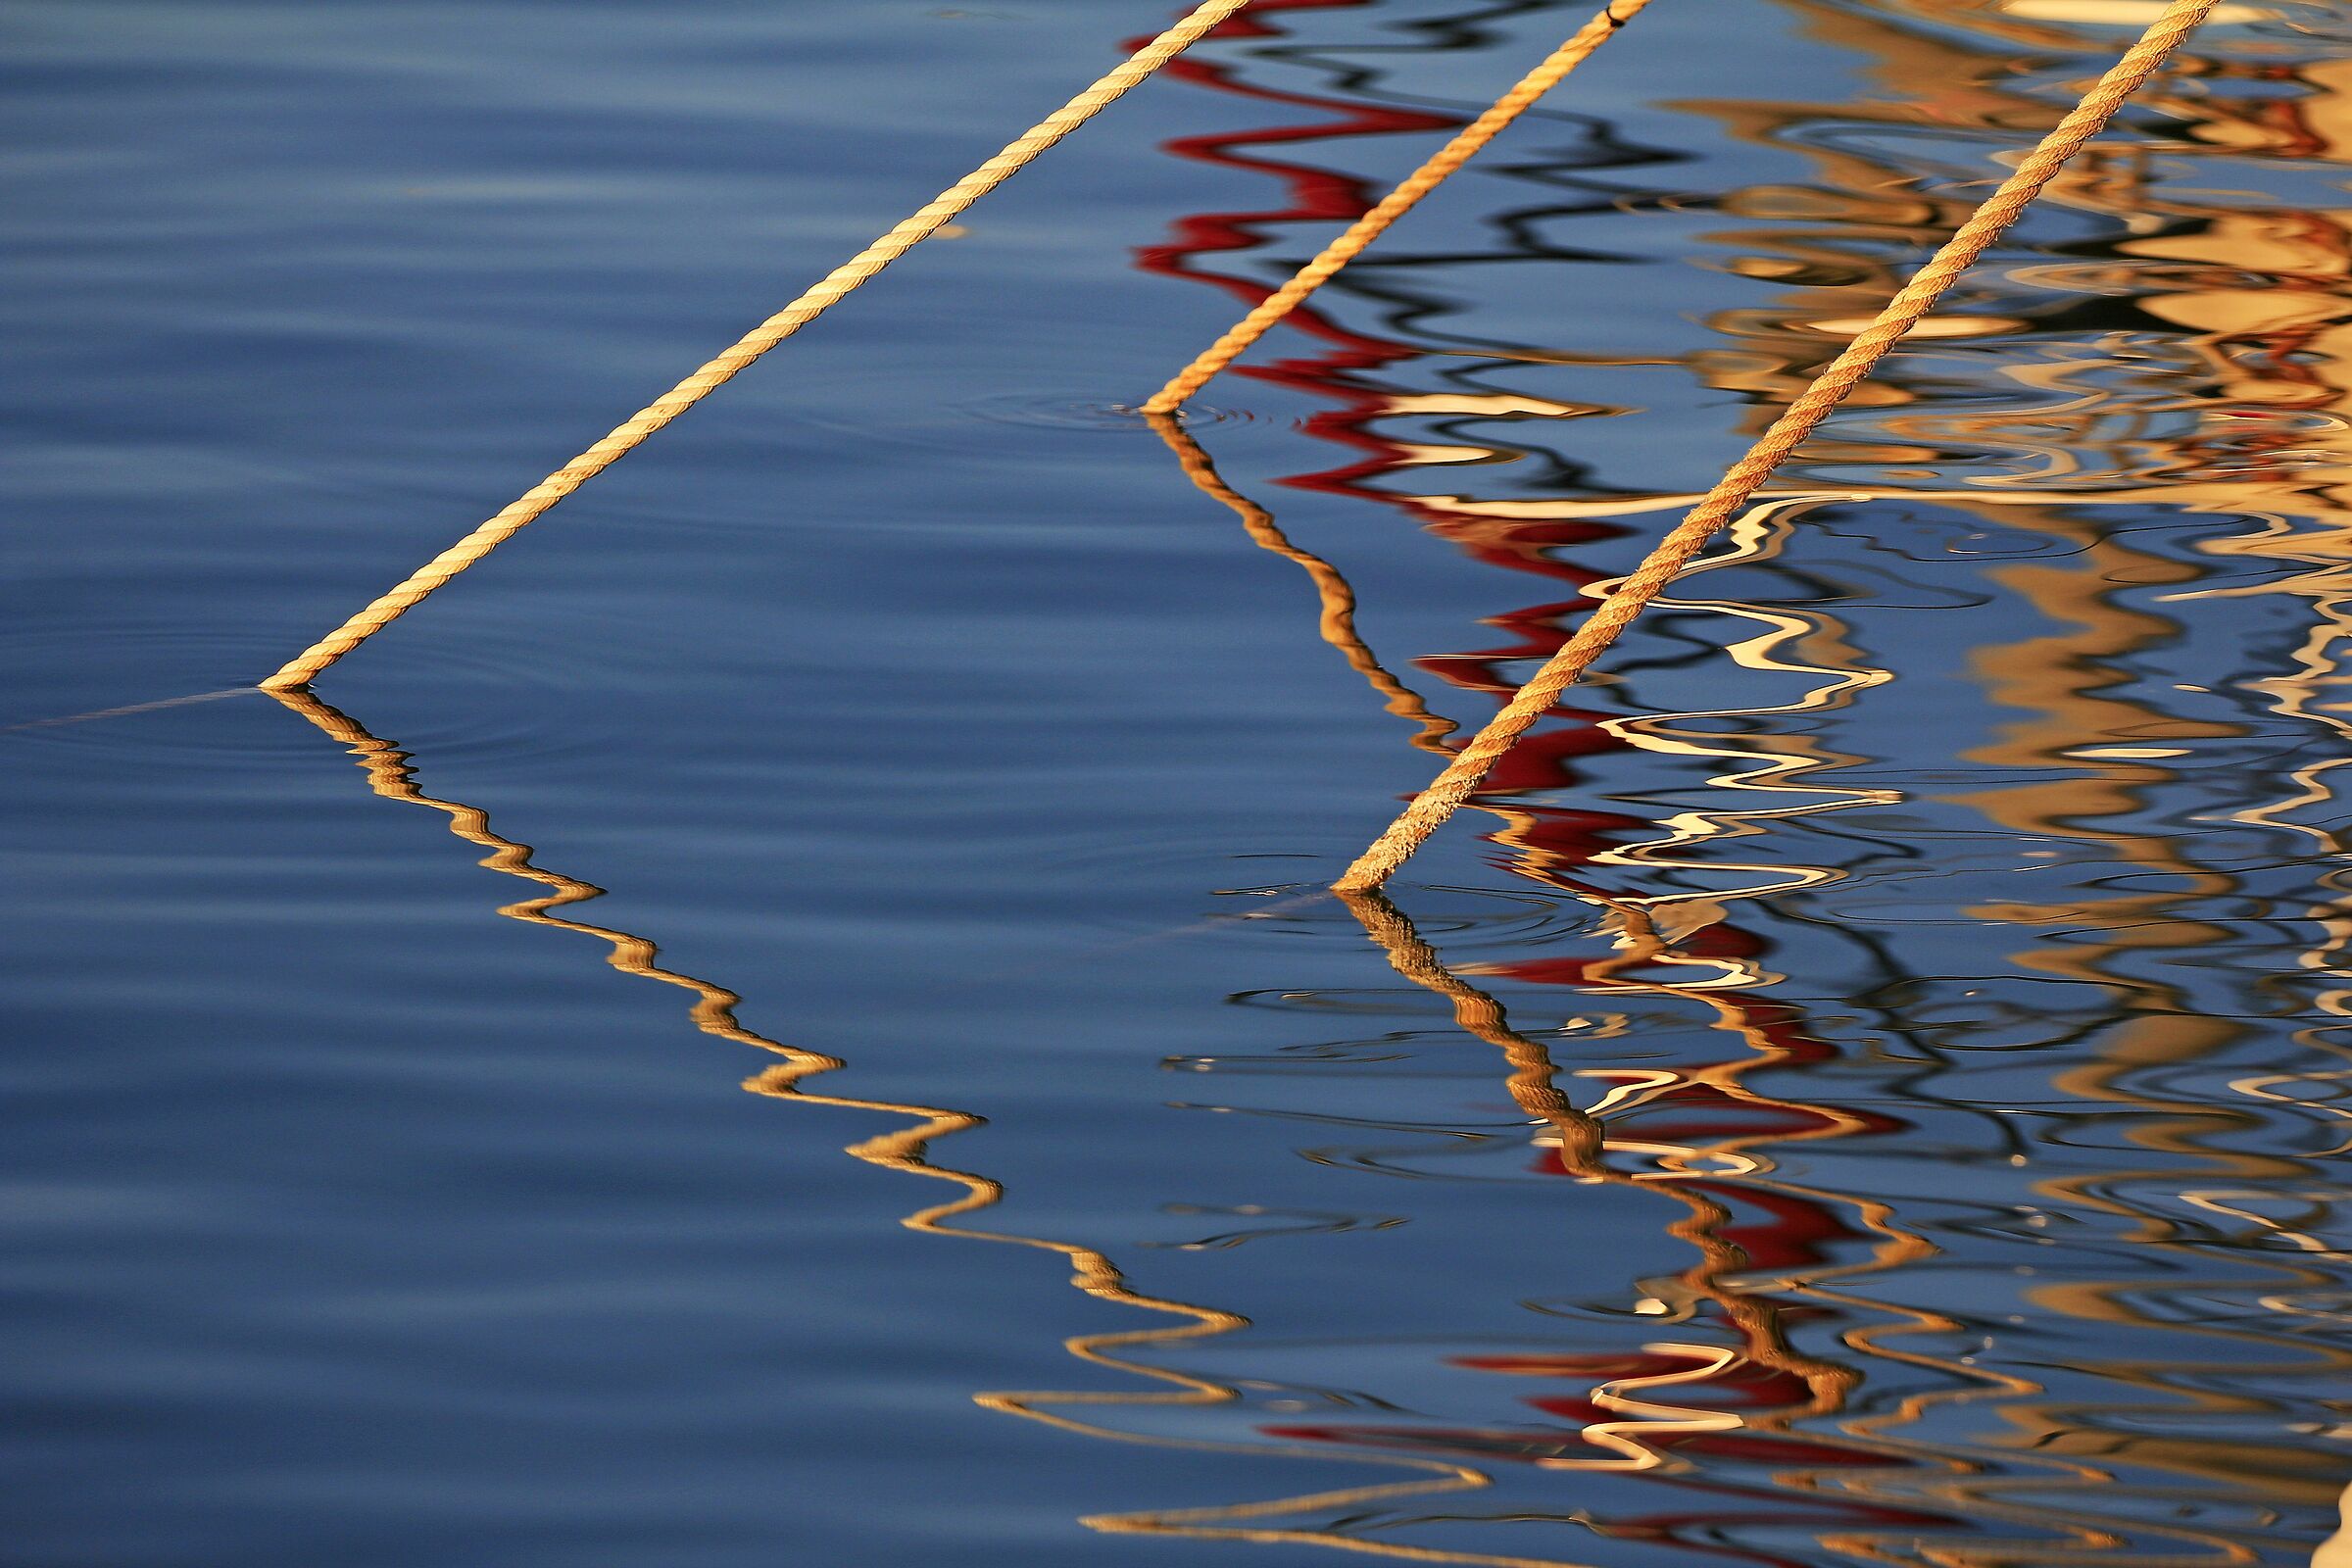 Reflections between the rope...